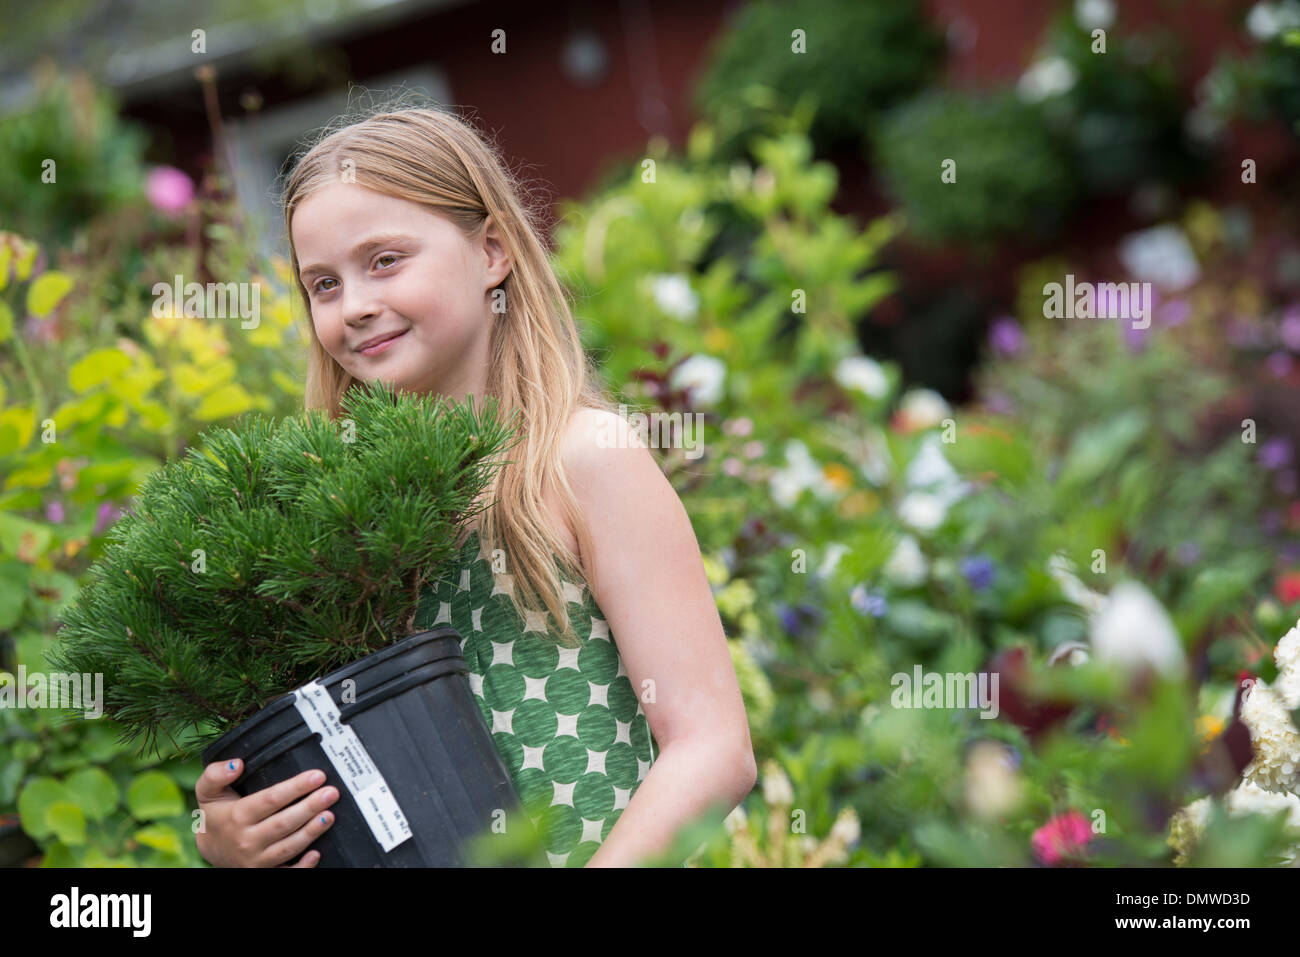 An organic flower plant nursery. A young girl carrying a plant in a pot. Stock Photo